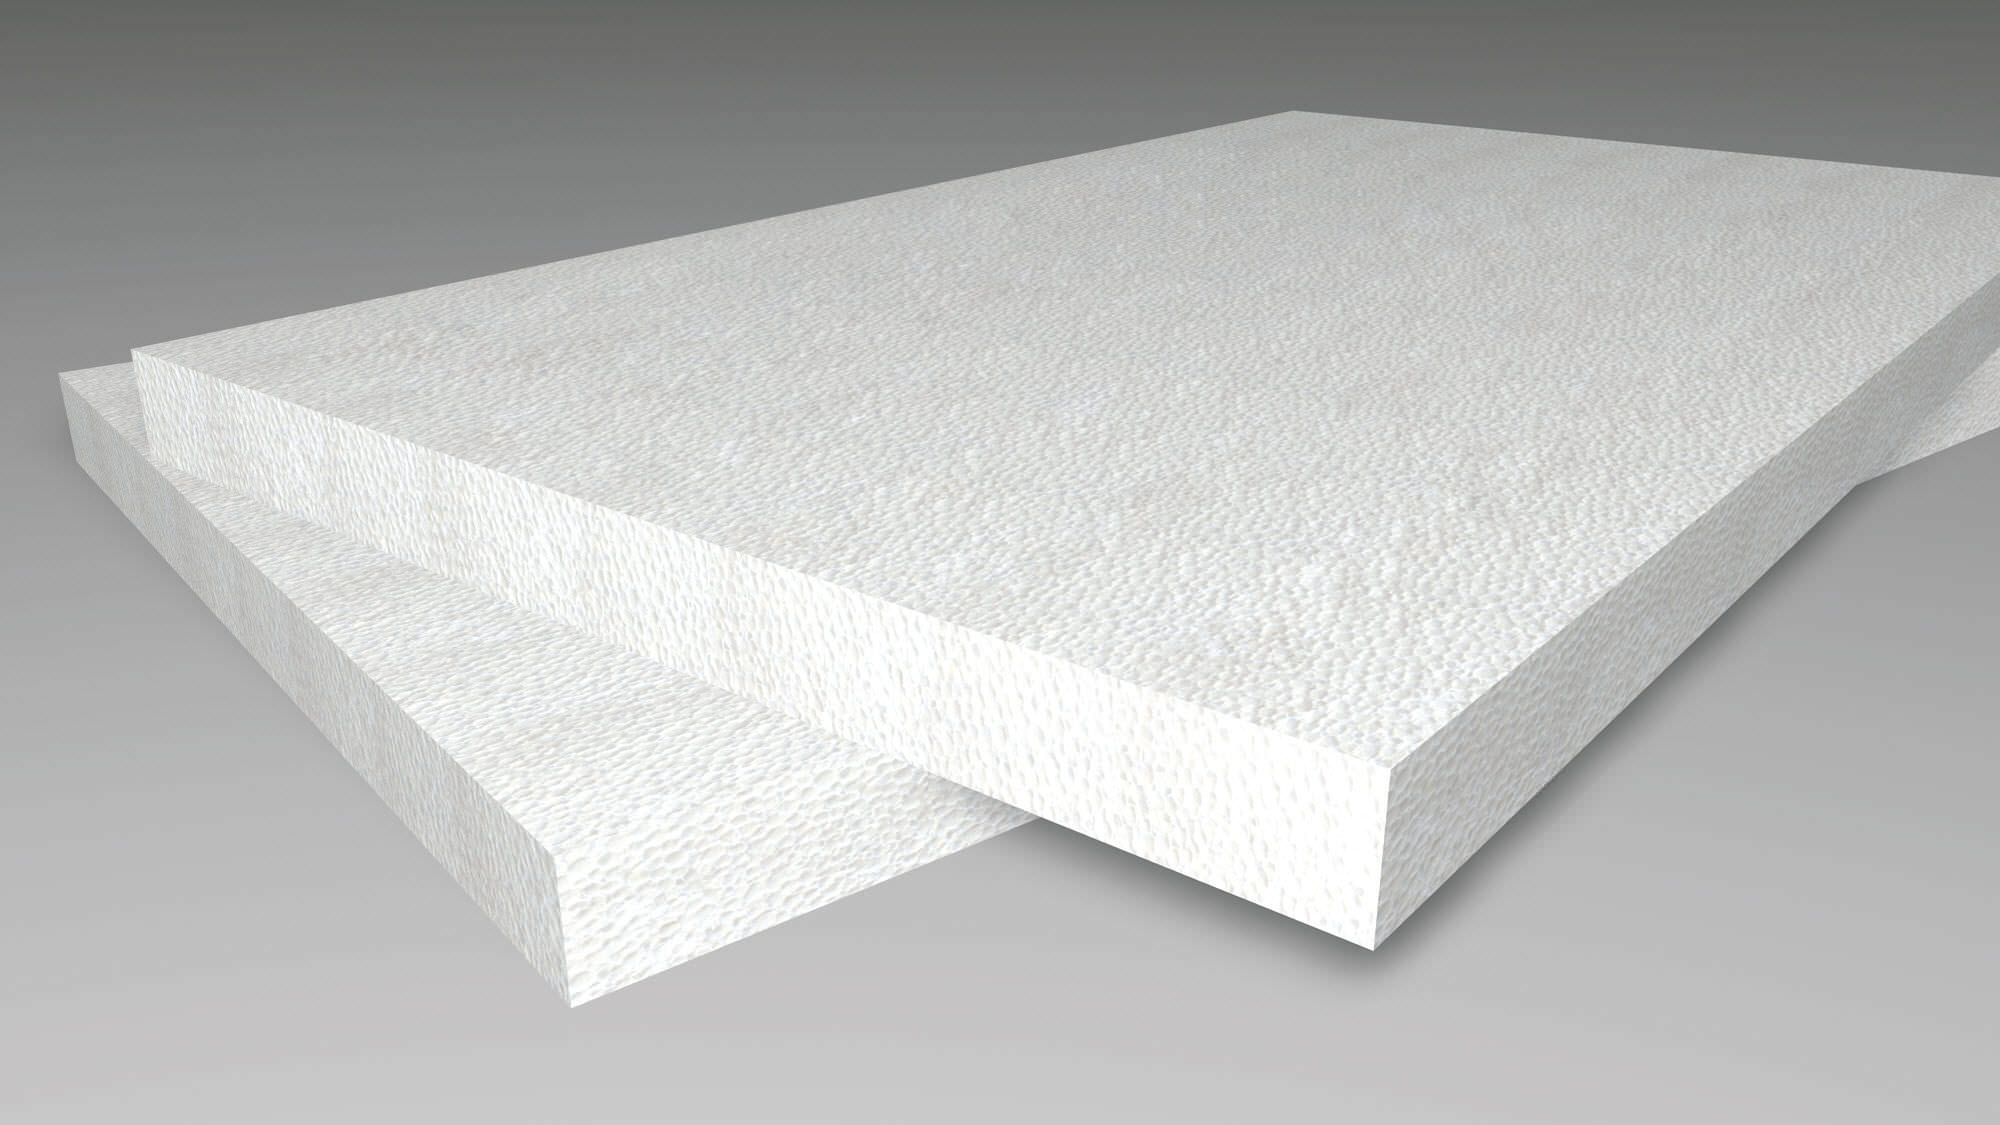 Are Expanded Polystyrene Insulation Sheets Energy Savers?